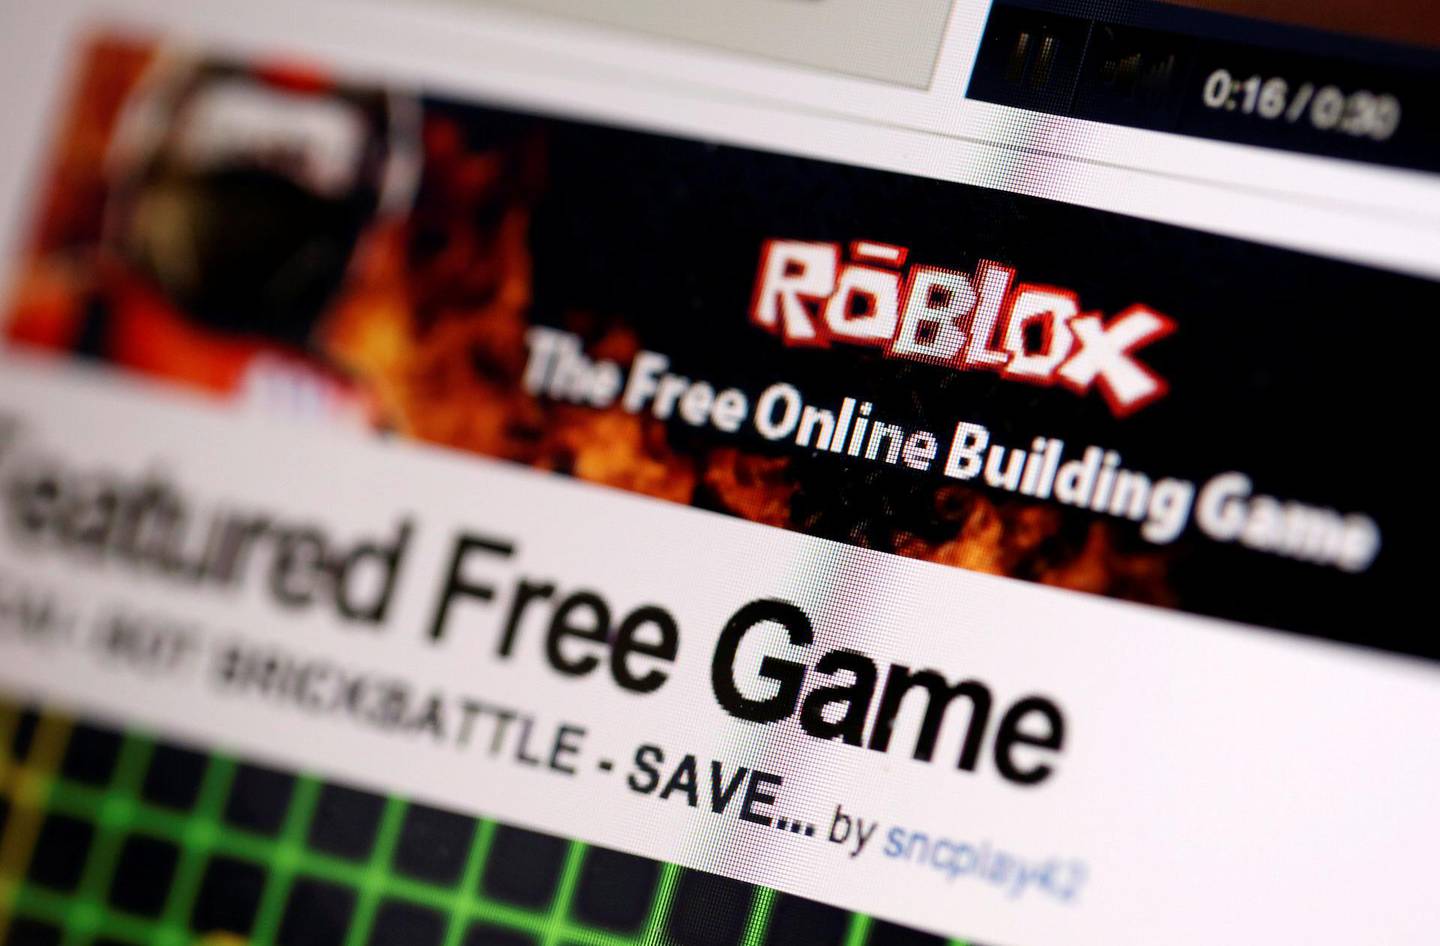 The Roblox website is displayed on a computer screen in this arranged photograph in London, U.K., on Wednesday, Aug. 29, 2012. Roblox designs and develops a wide rage of online games, such as internet three-dimensional (3D) games and tutorial games for kids. Photographer: Chris Ratcliffe/Bloomberg
